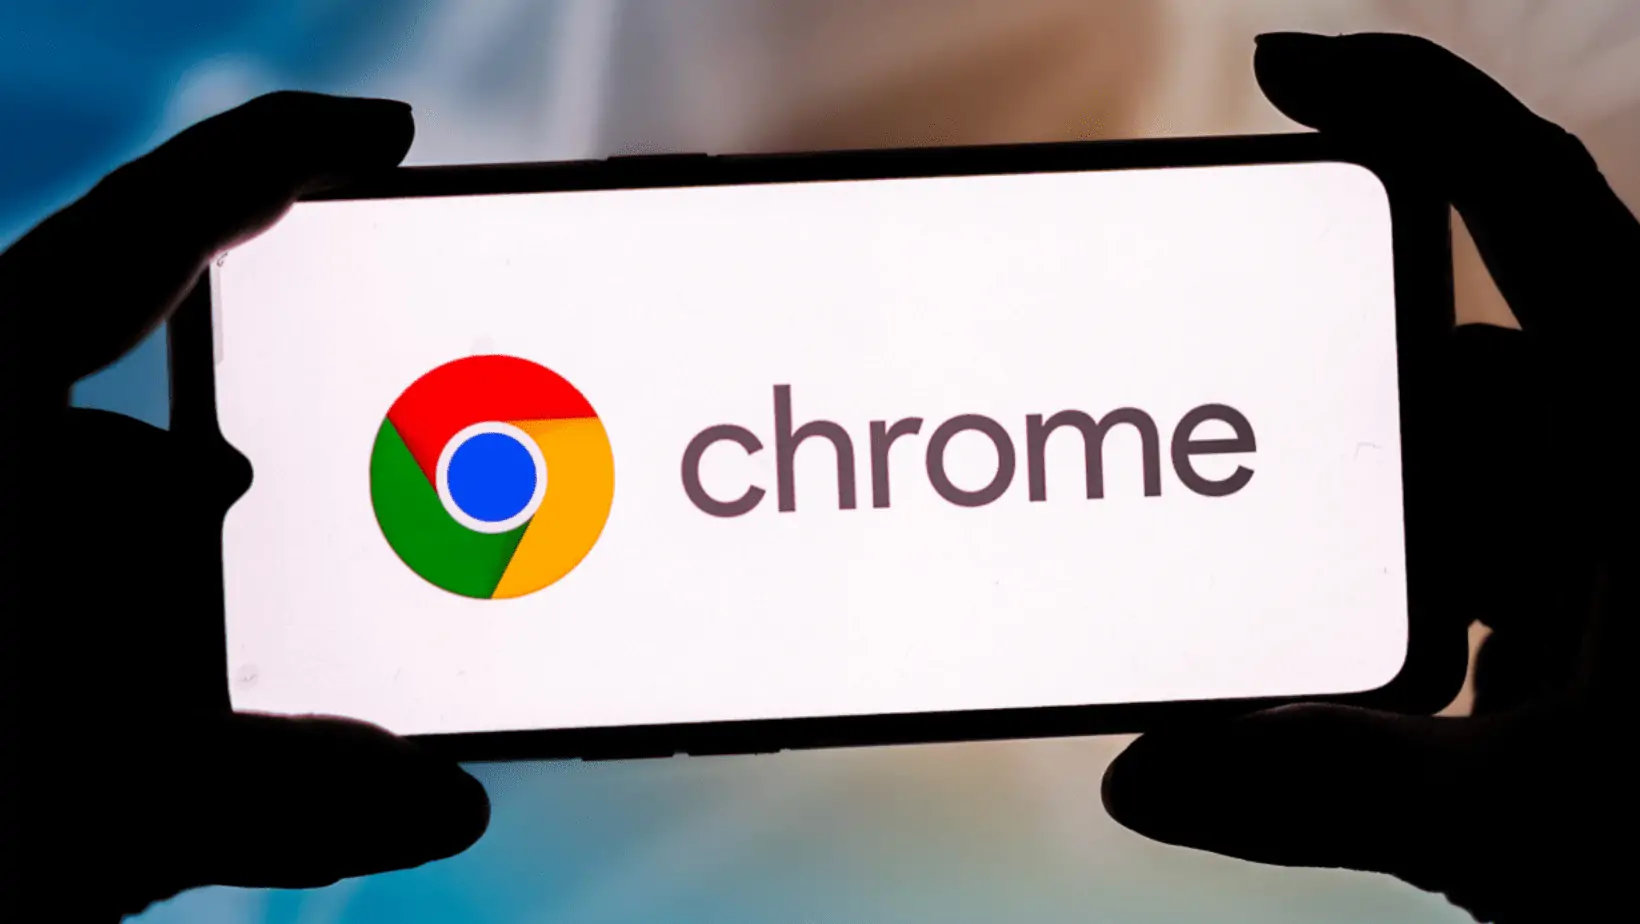 Google Enhances Search Suggestions in Chrome for Improved Browsing Experience